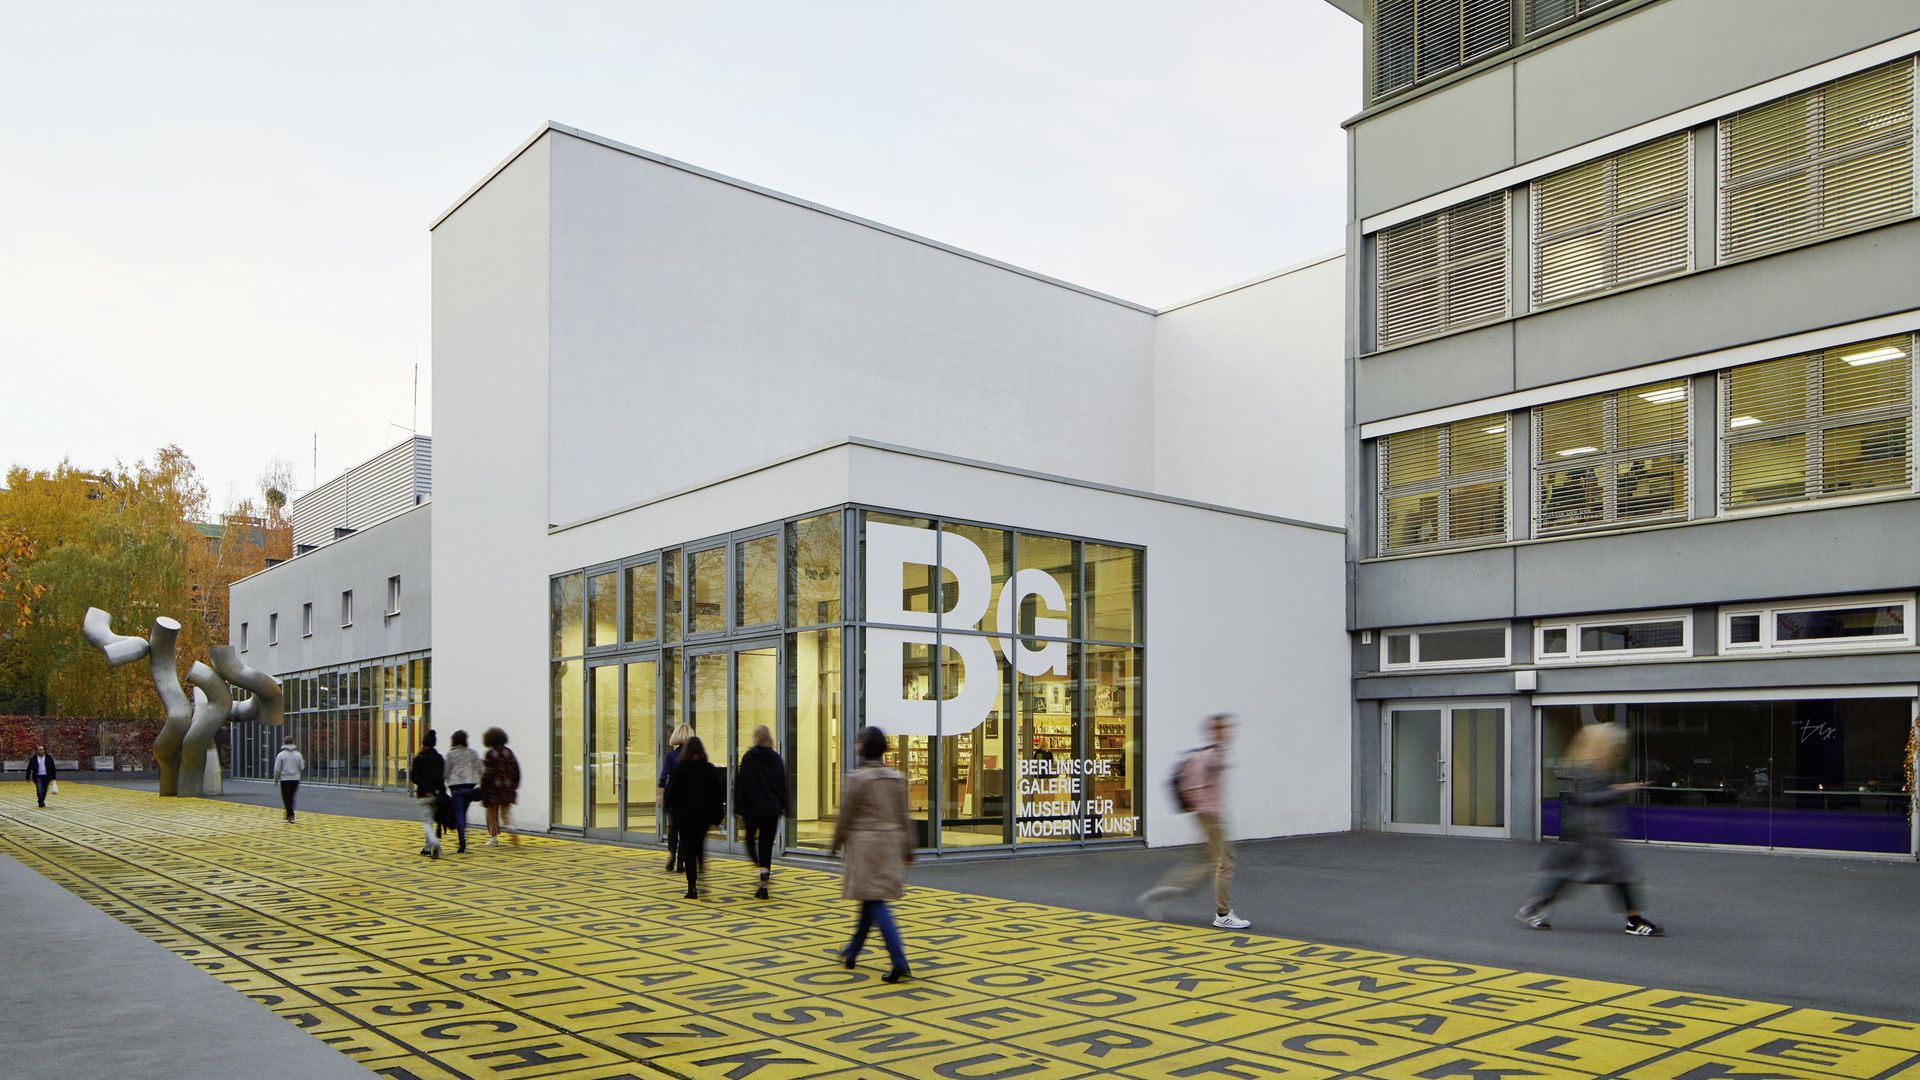 Photo: Building with flat roof and glass front displaying the logo of the Berlinische Galerie. In front of it, people on a square with metal sculpture and floor art.